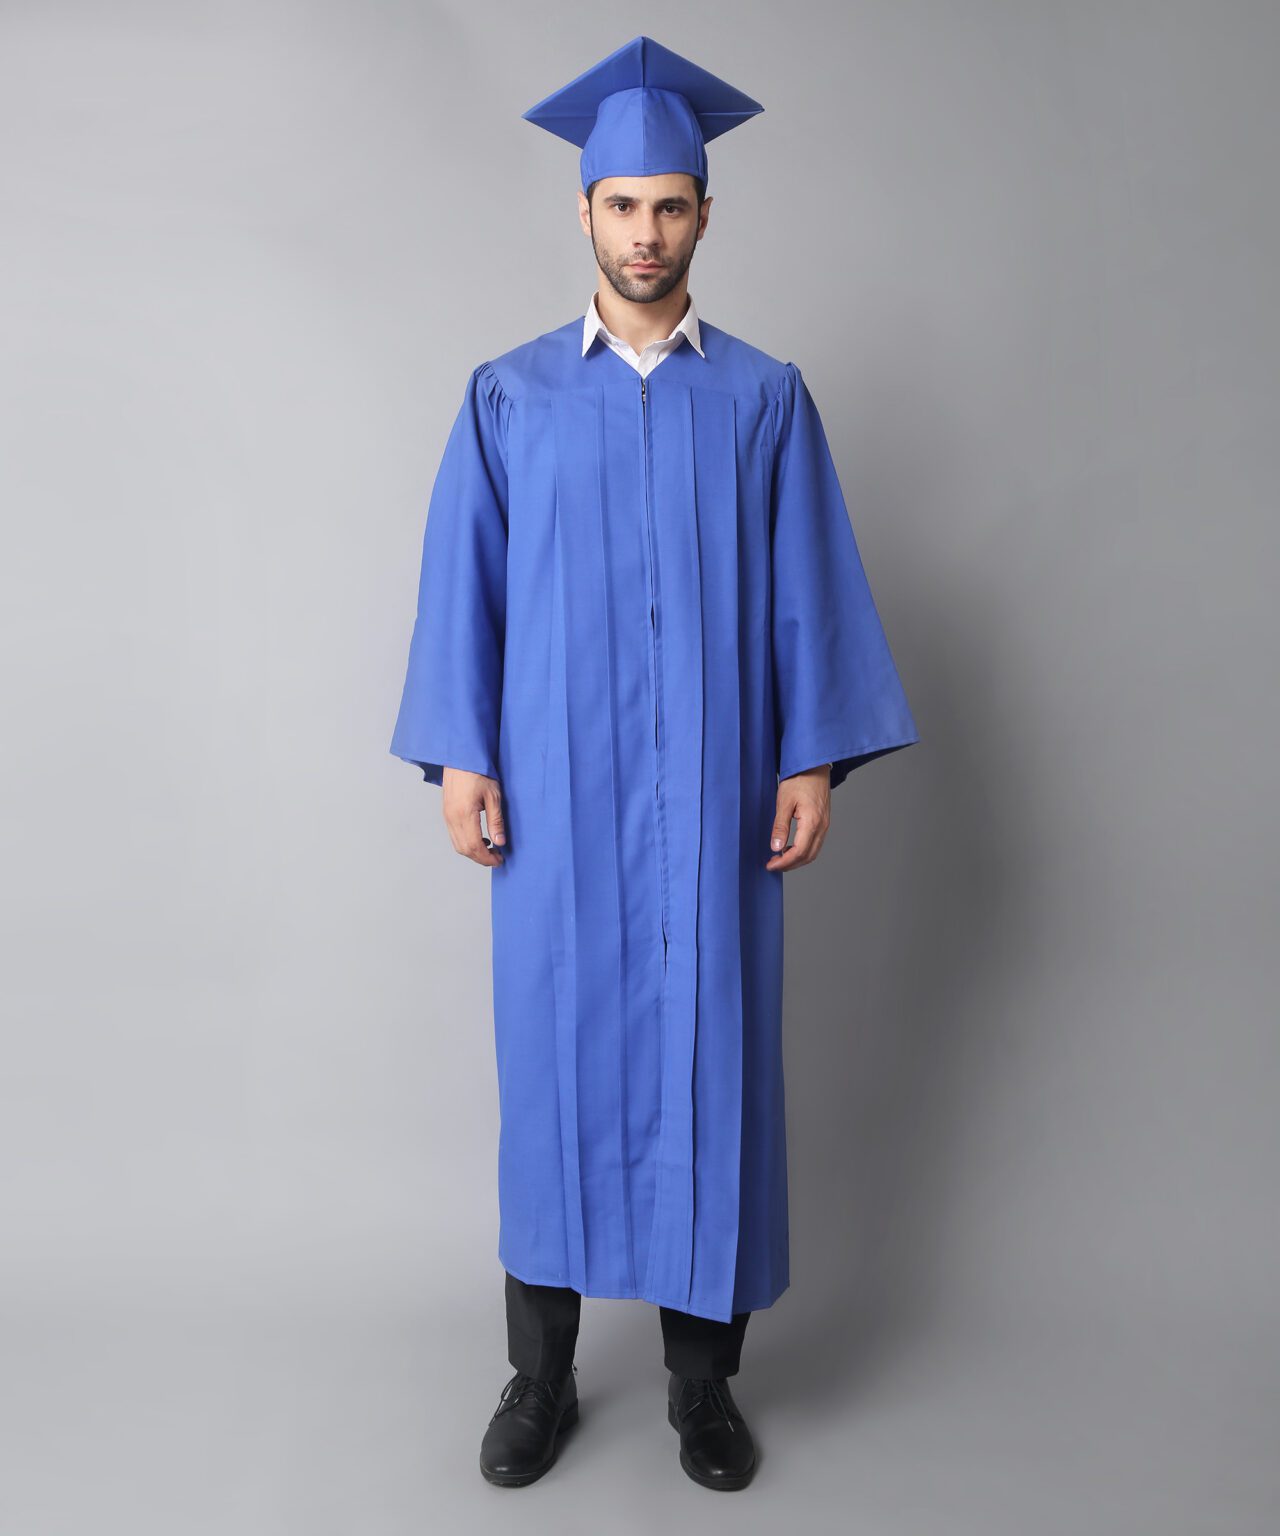 Cap and Gown Size Exchanges - Homeschool Diploma